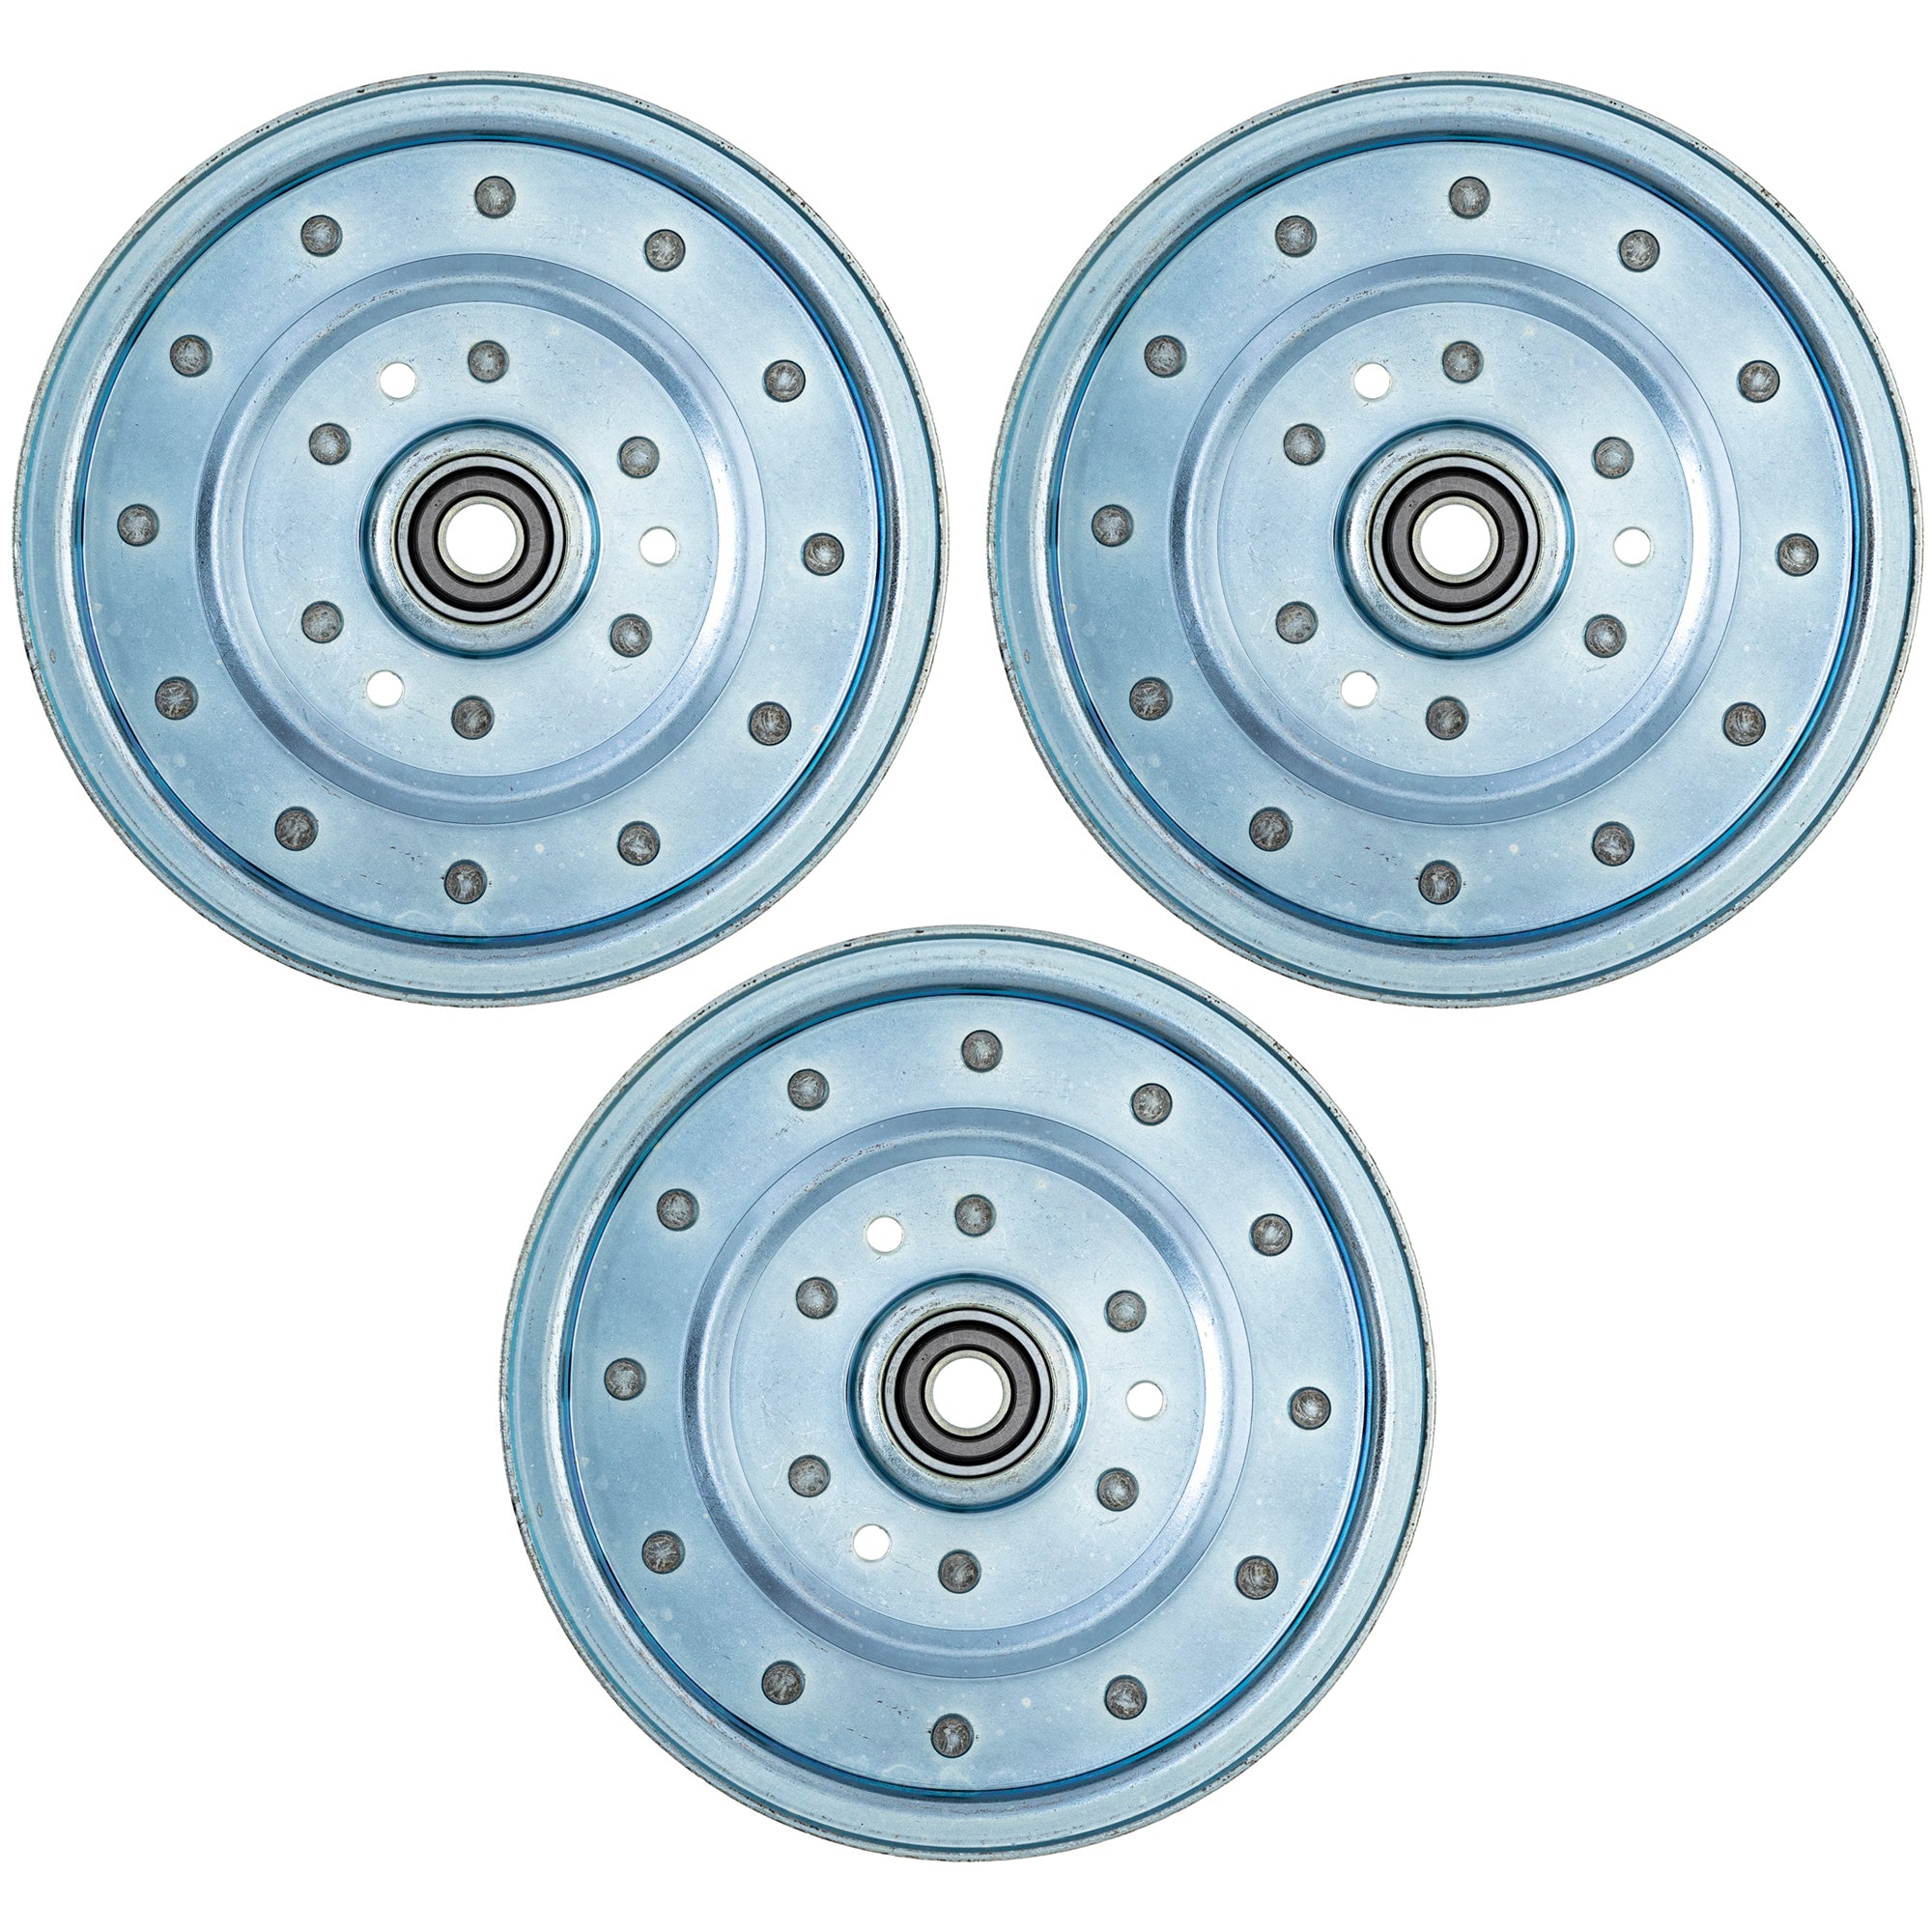 8TEN 810-CID2273L Idler Pulley 3-Pack for zOTHER Snapper MTD Cub